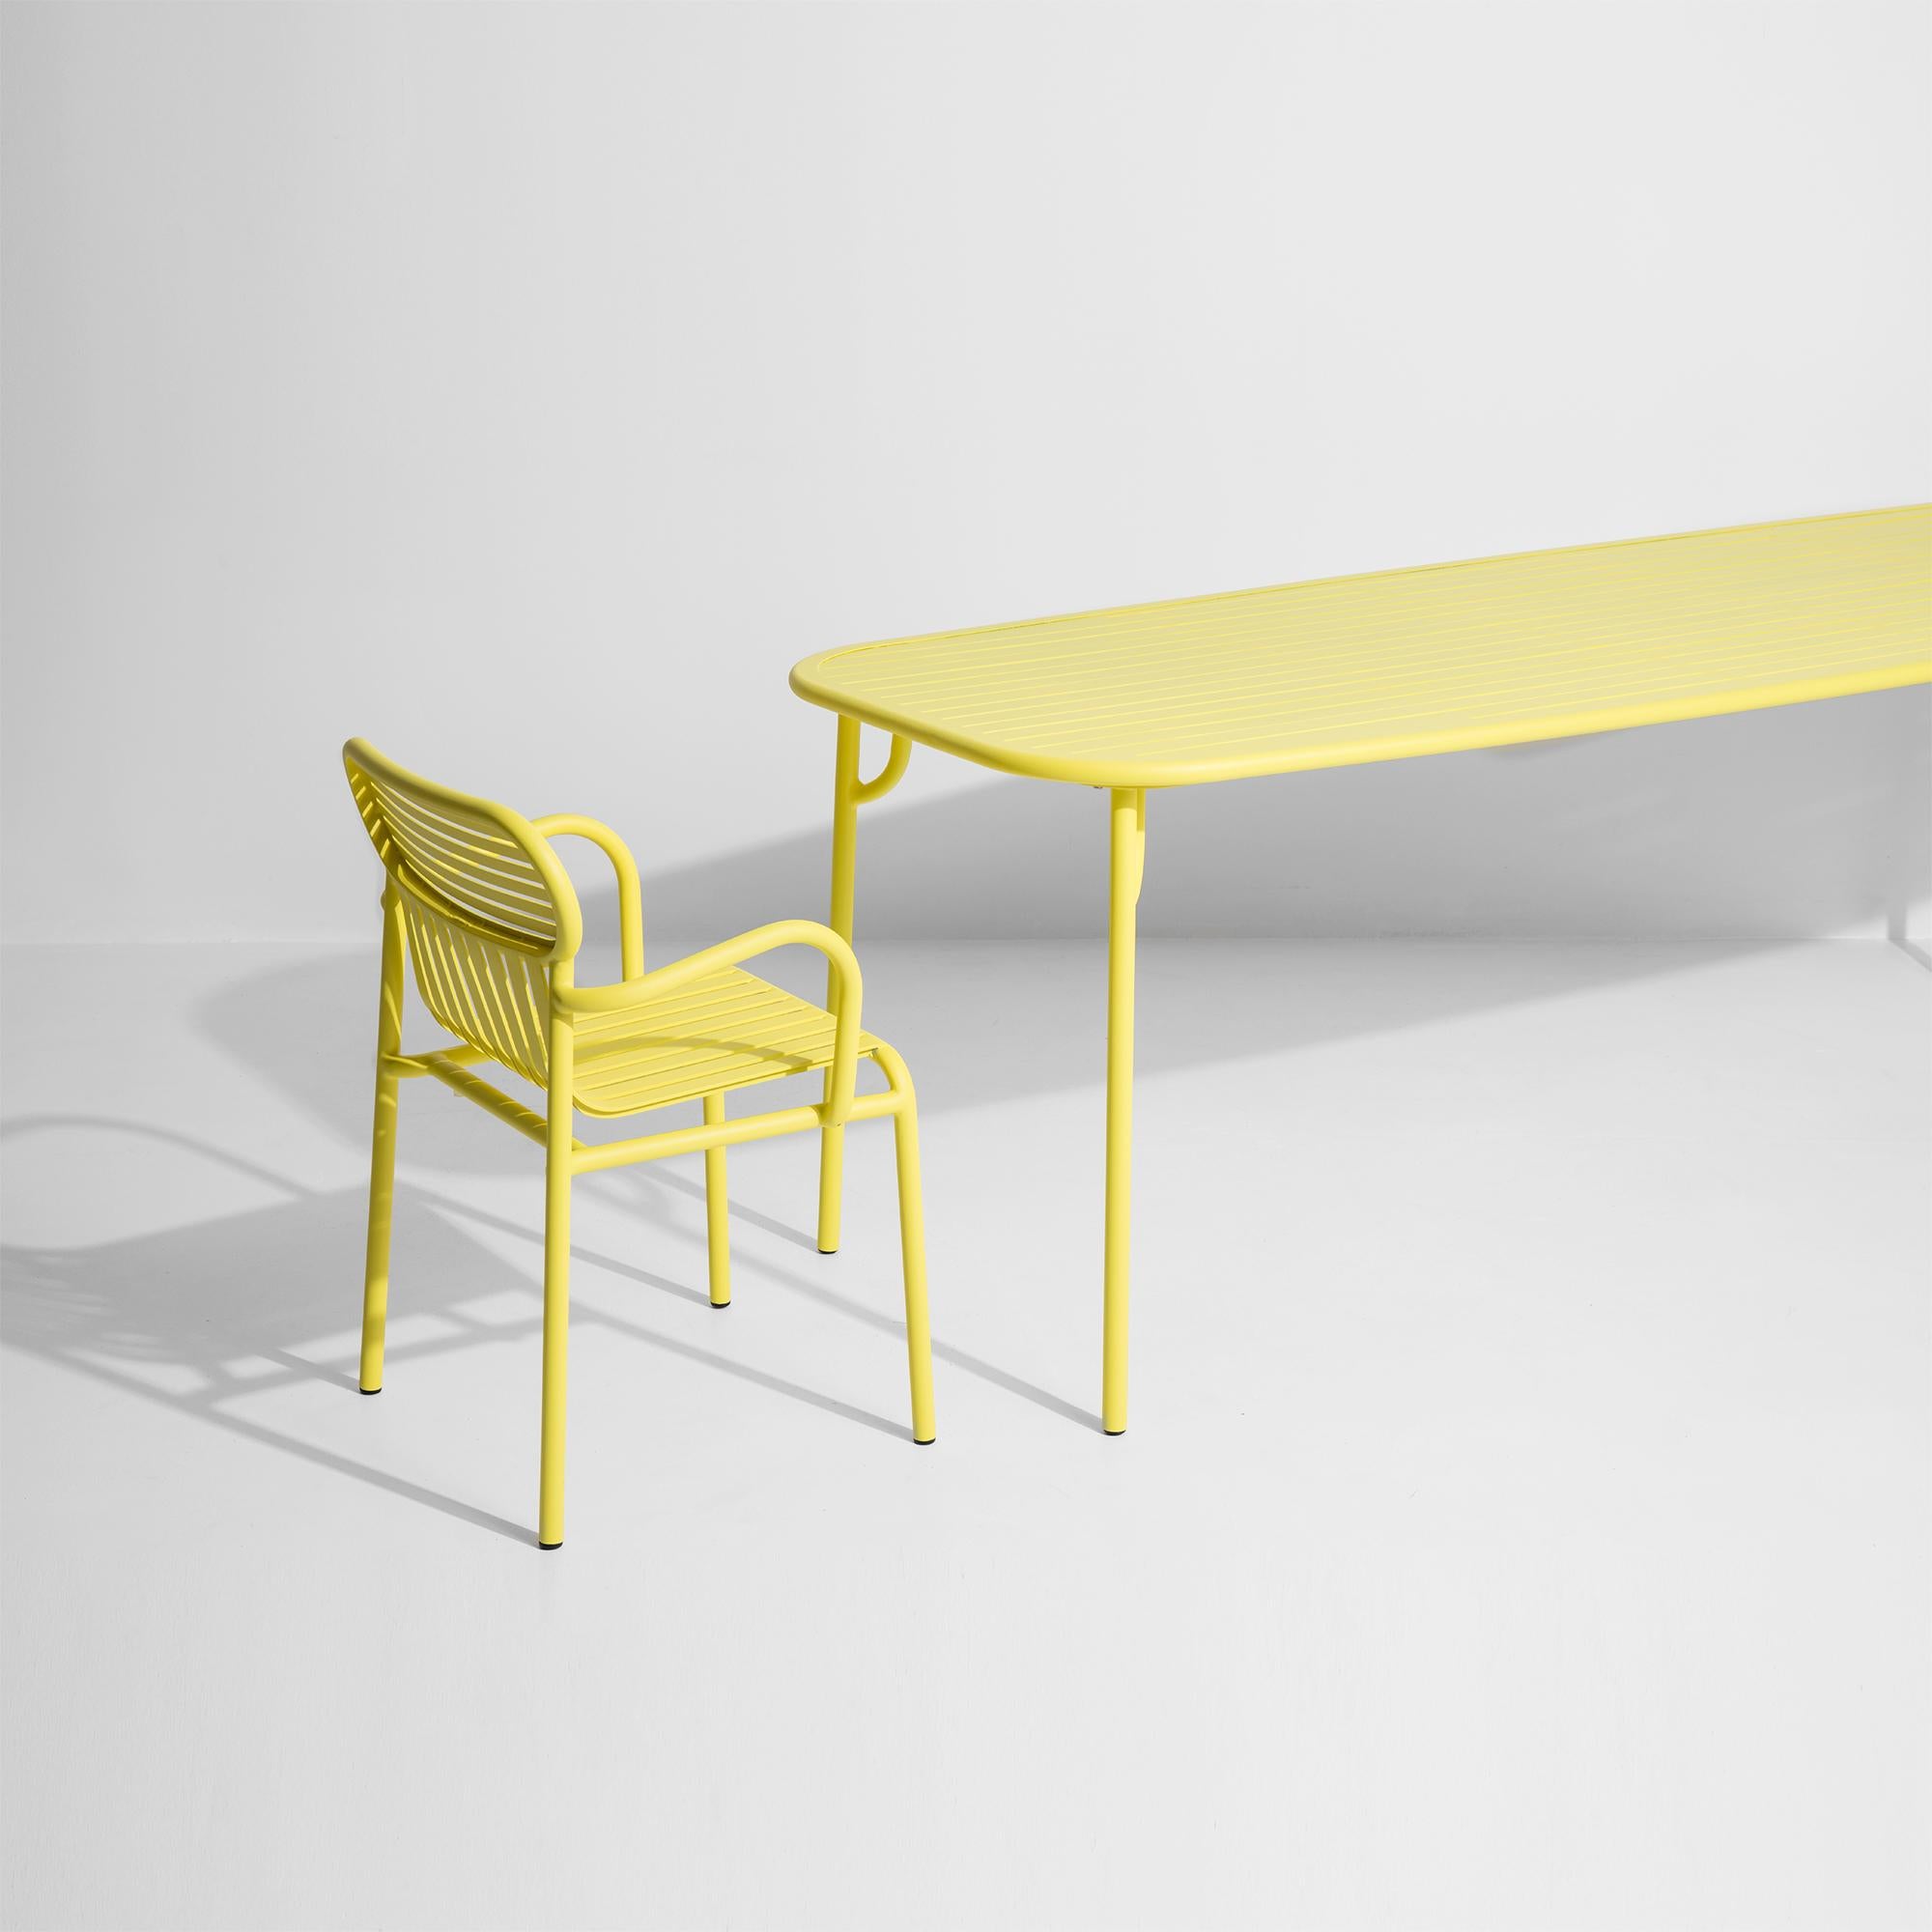 Contemporary Petite Friture Week-End Bridge Chair in Yellow Aluminium, 2017 For Sale